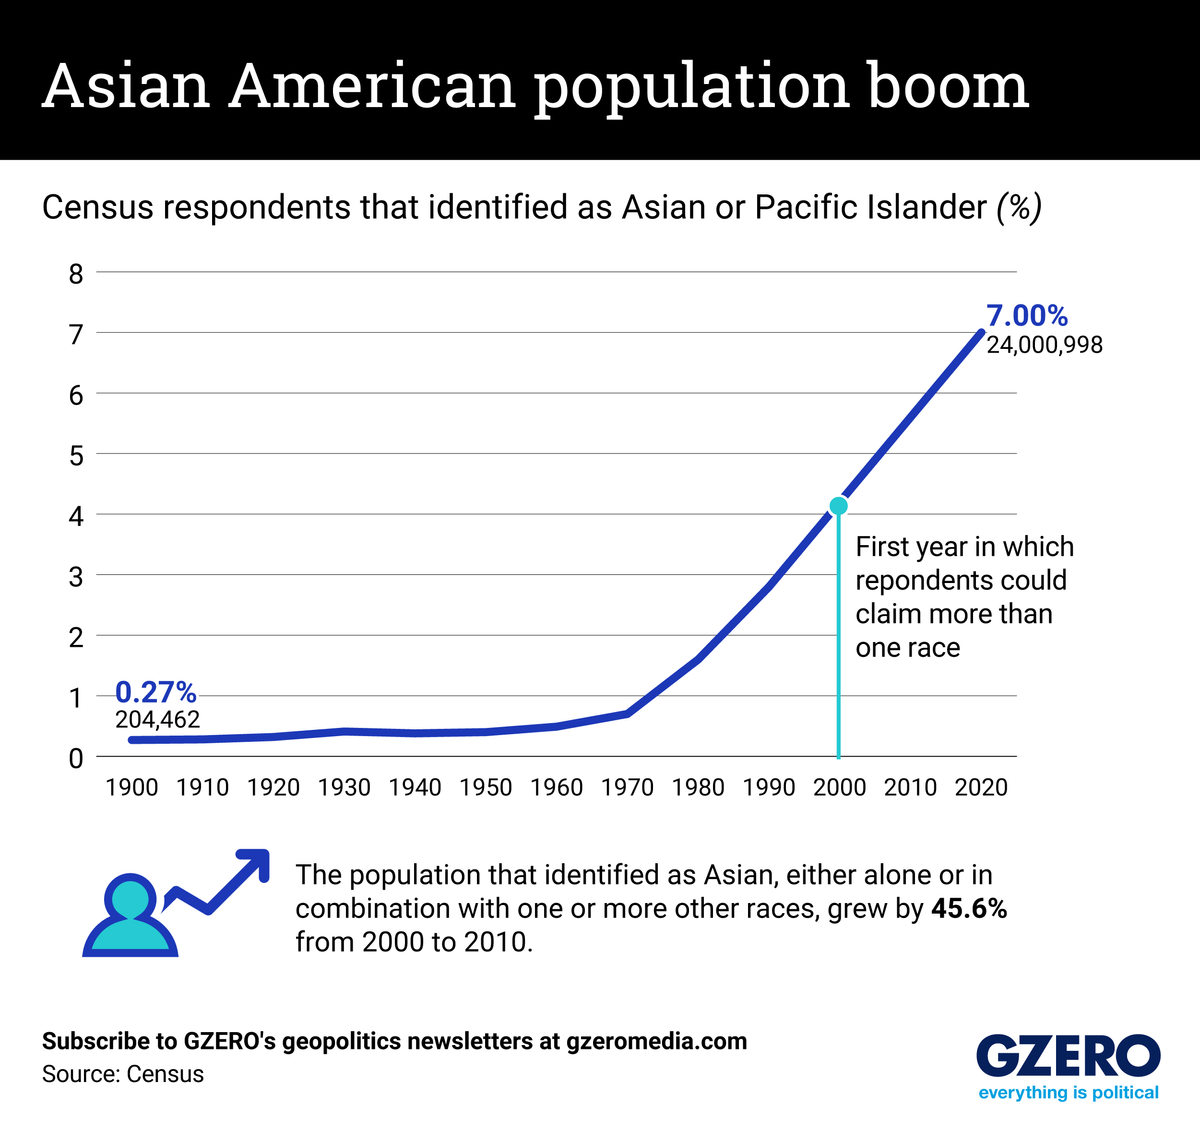 Graphic Truth: Asian American population boom